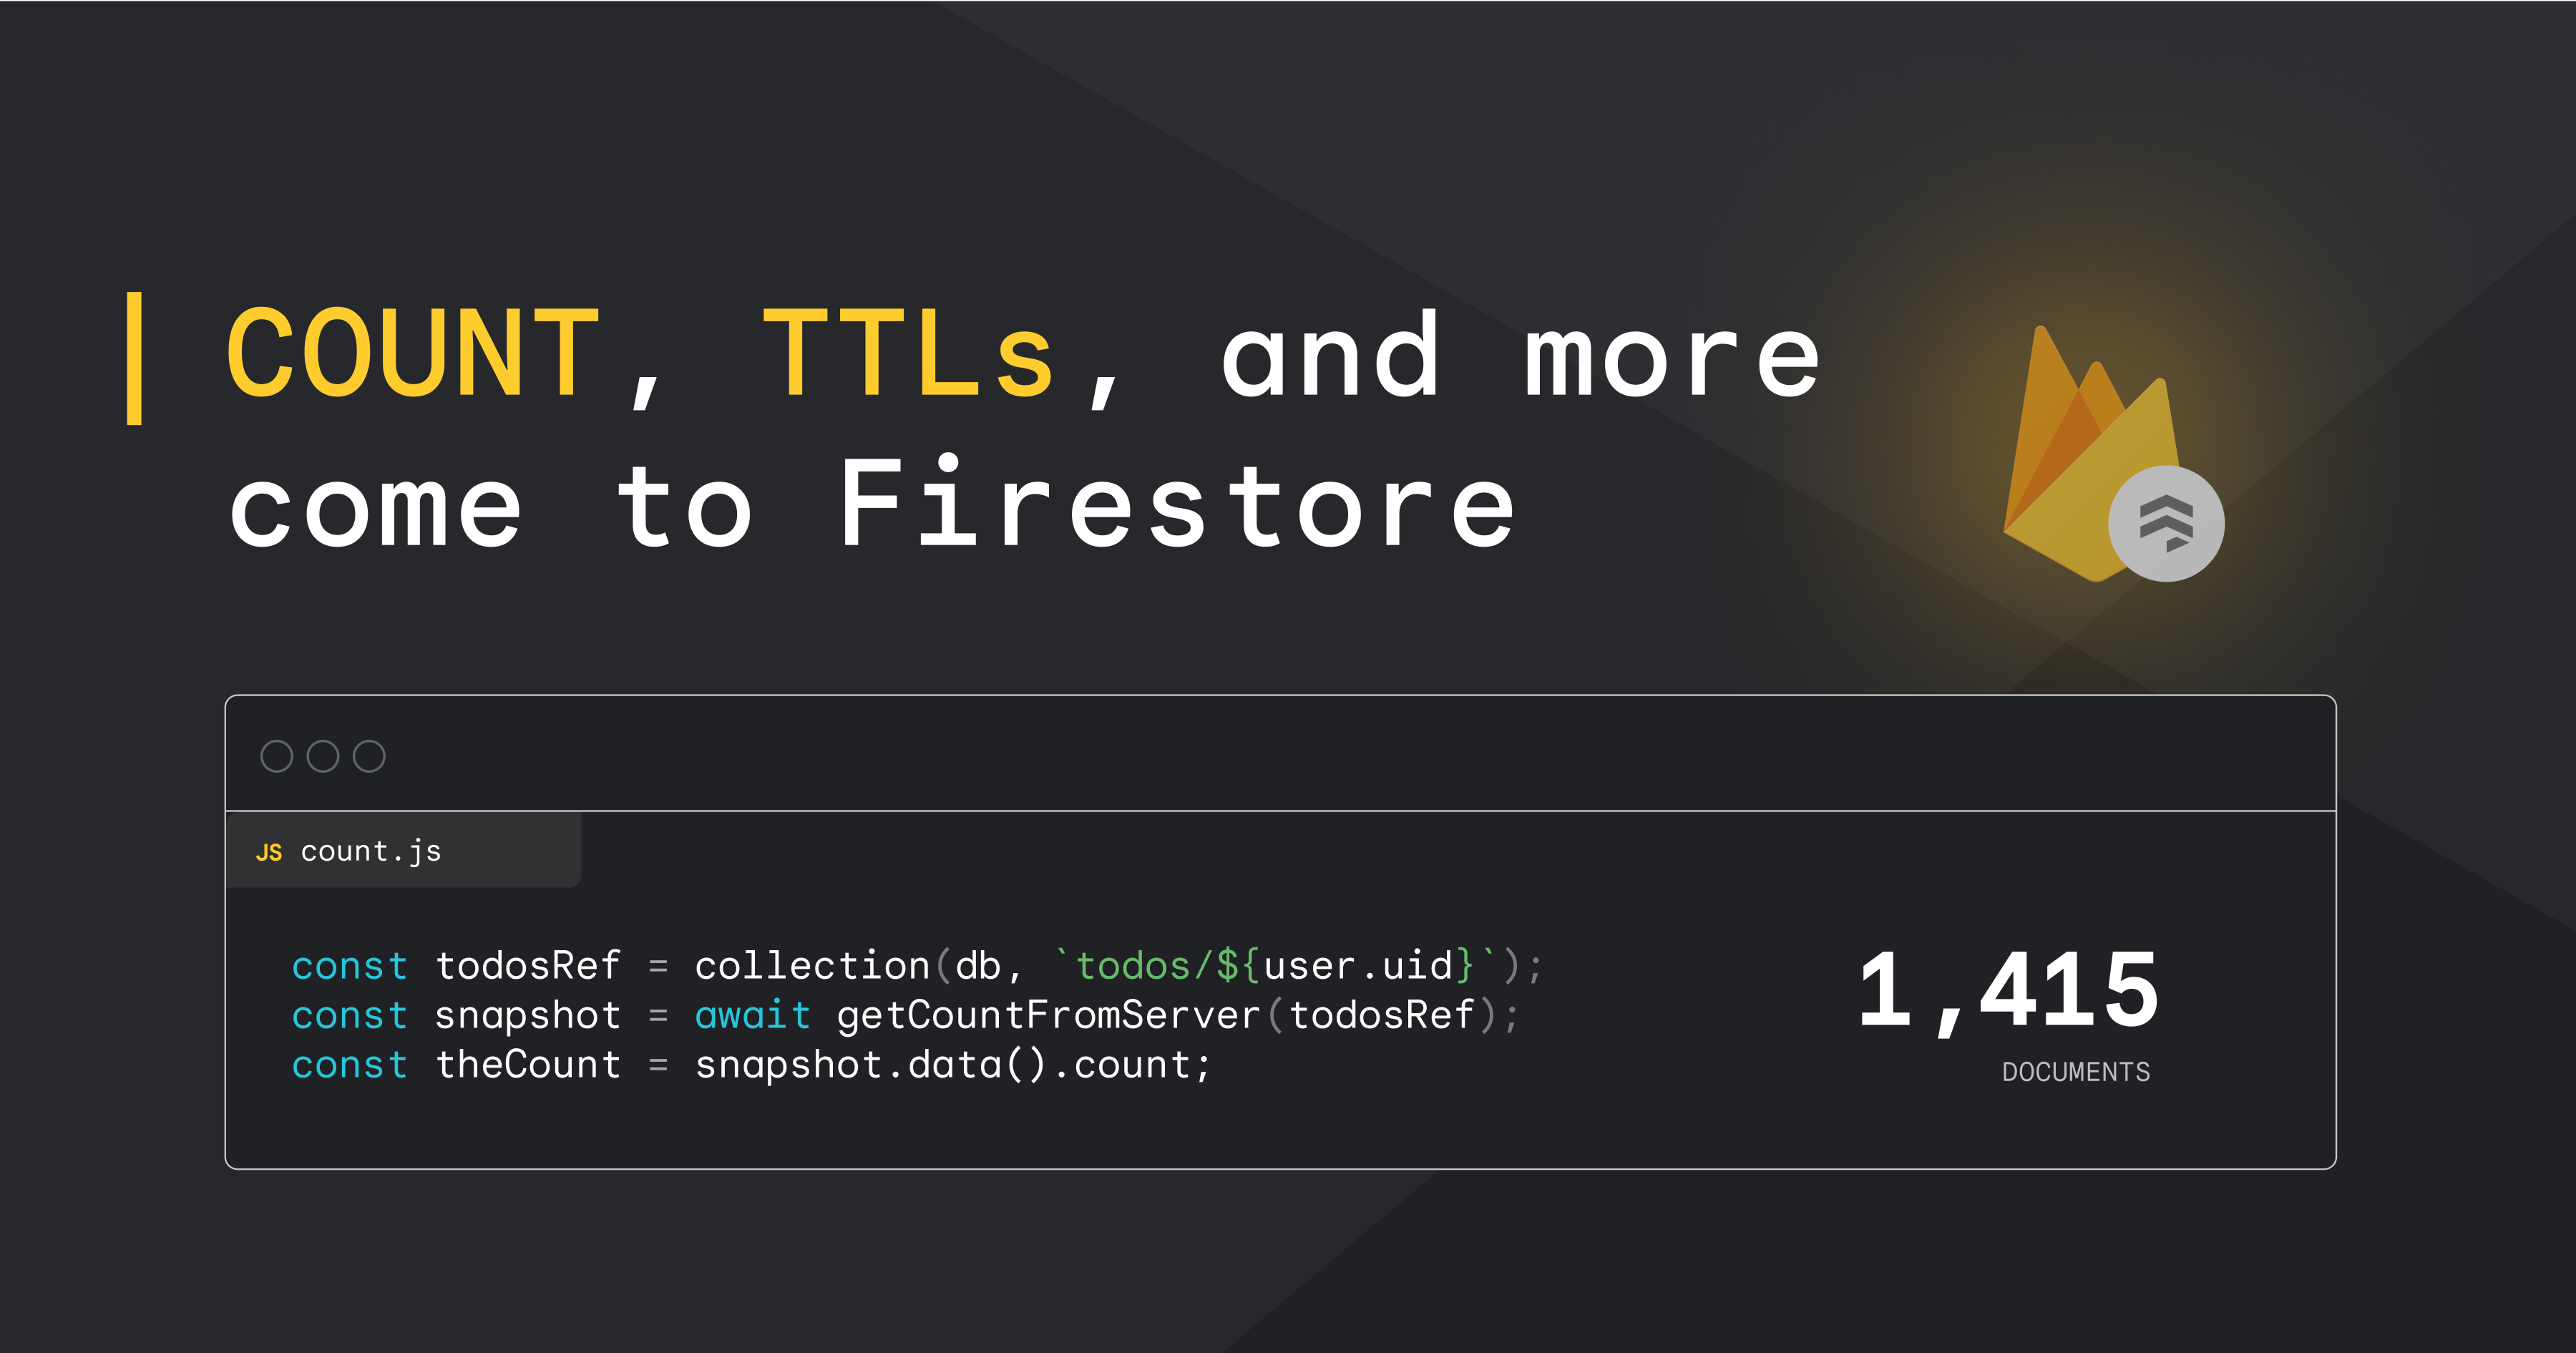 Introducing COUNT, TTLs, and better scaling in Firestore